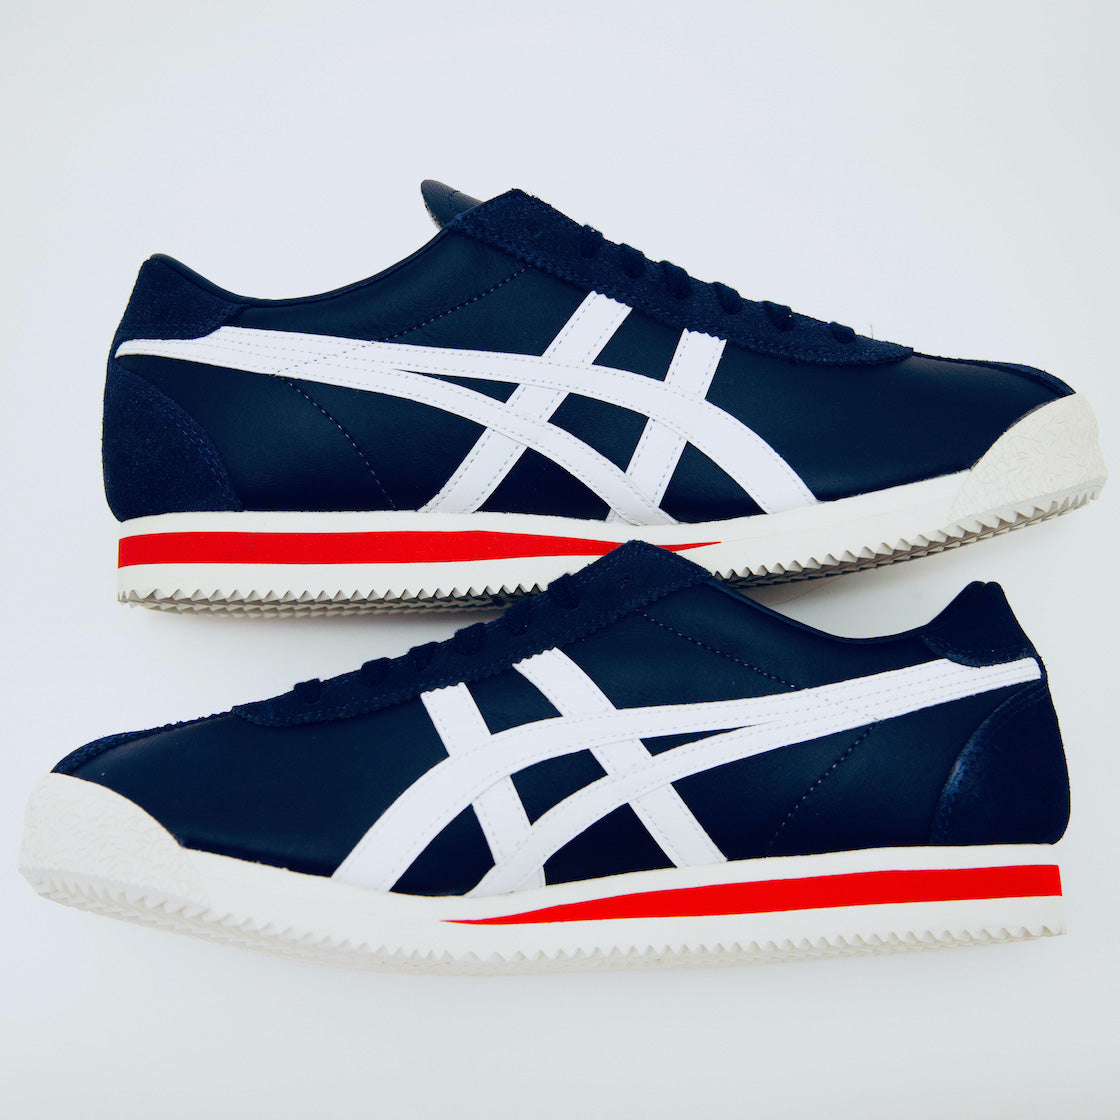 Is Onitsuka Tiger The Same As Asics? | Canoe Club